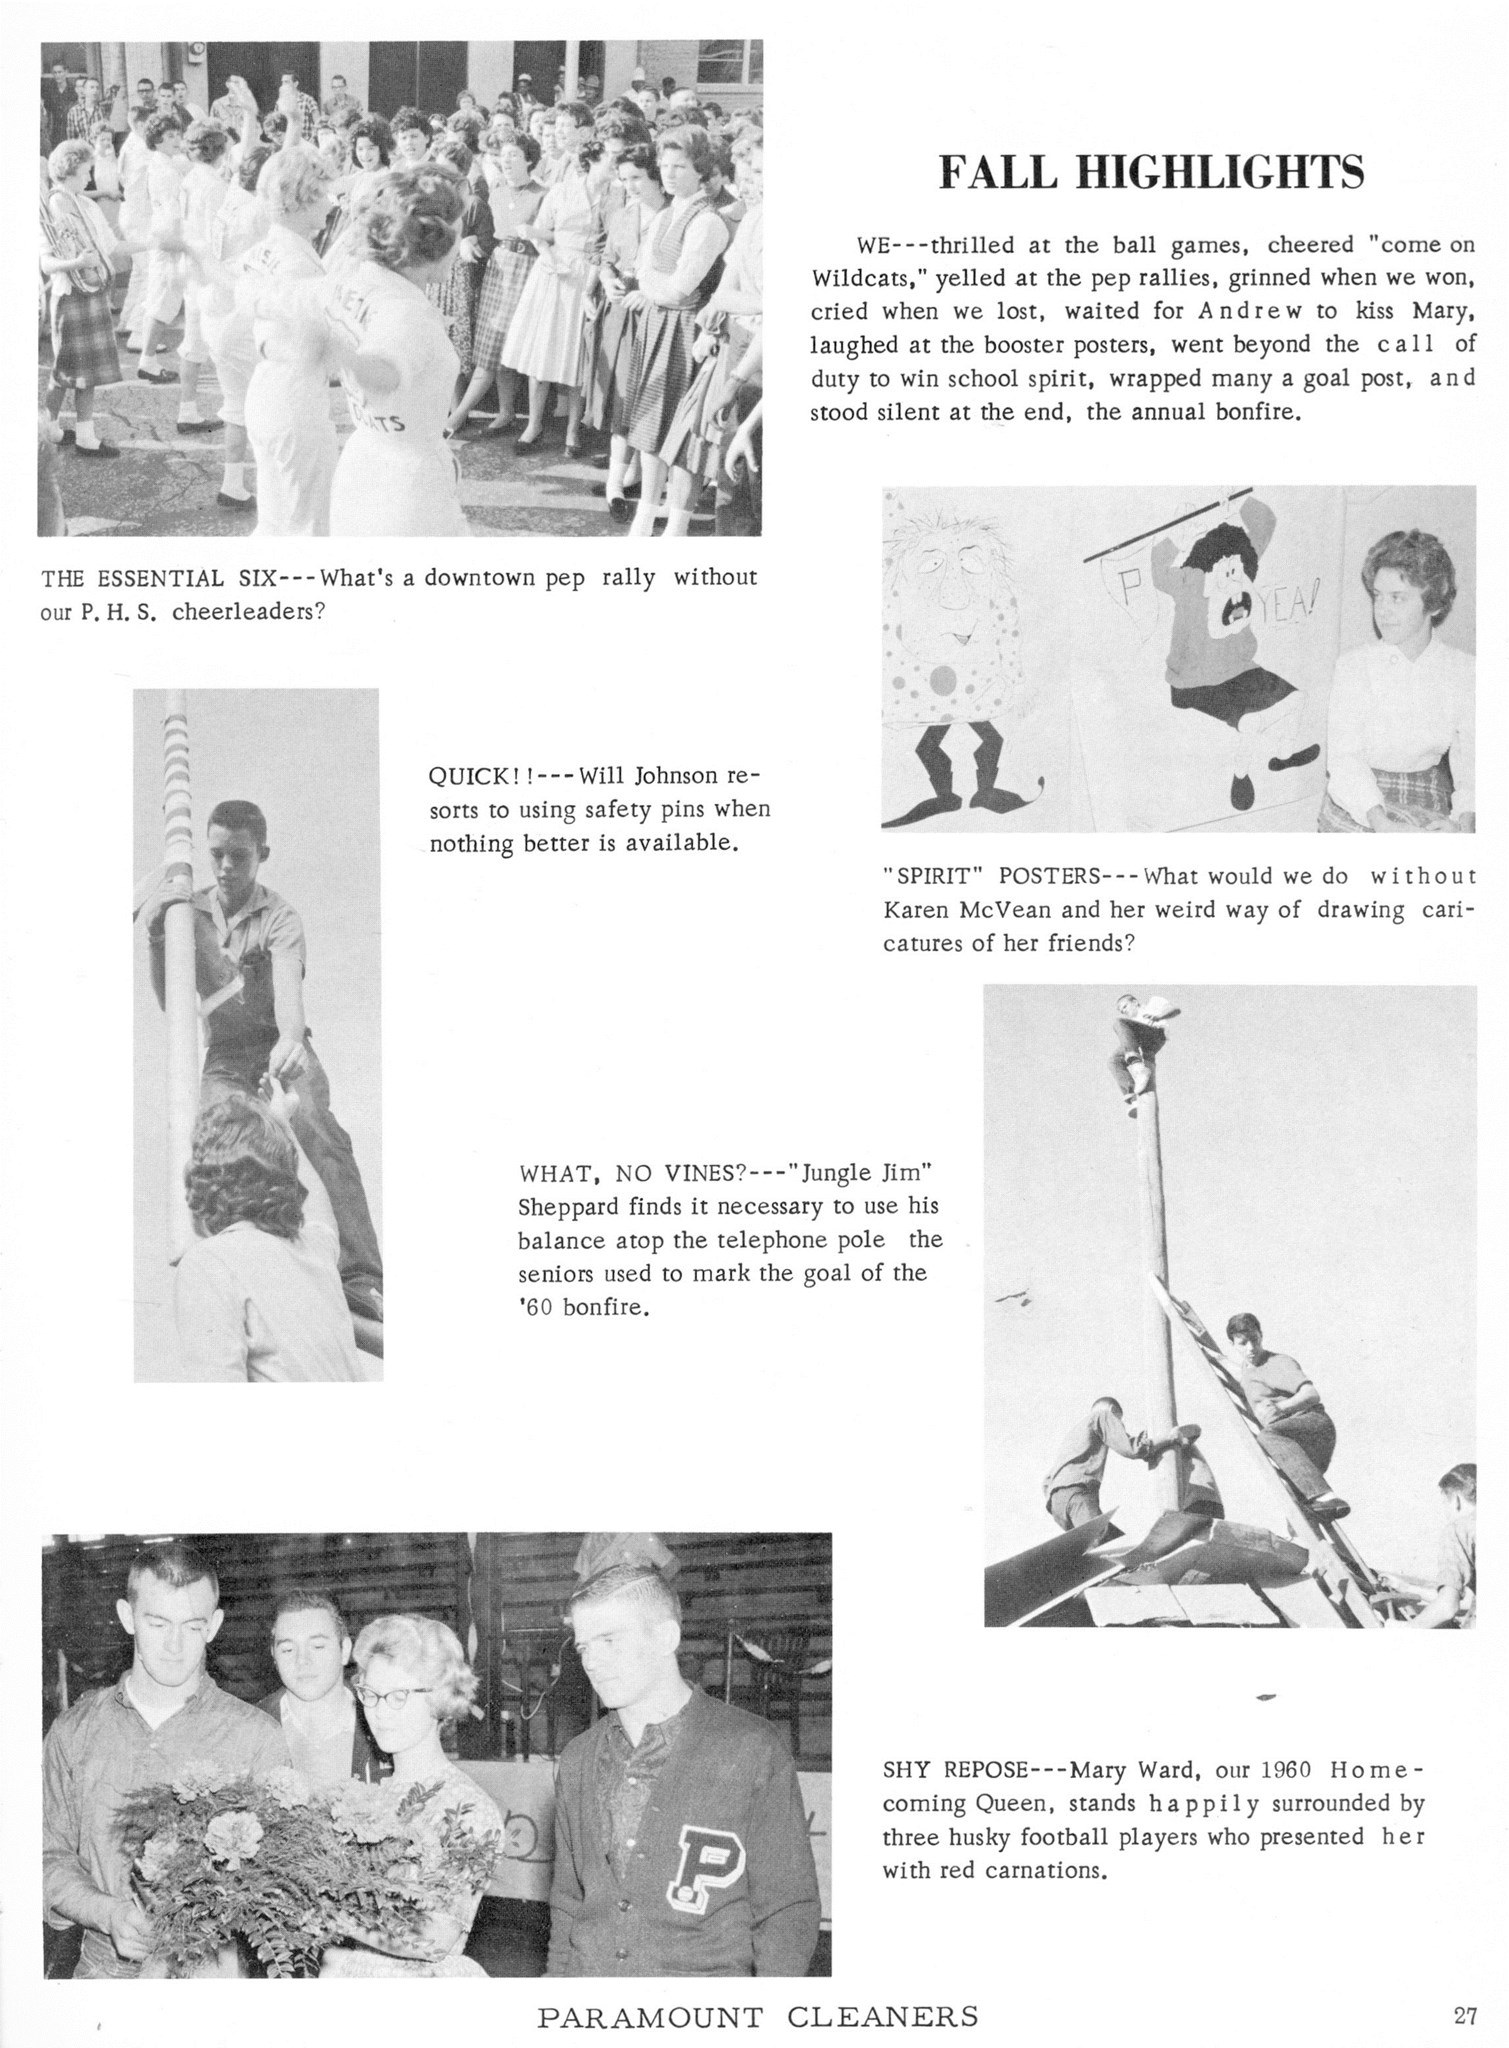 ../../../Images/Large/1961/Arclight-1961-pg0027.jpg